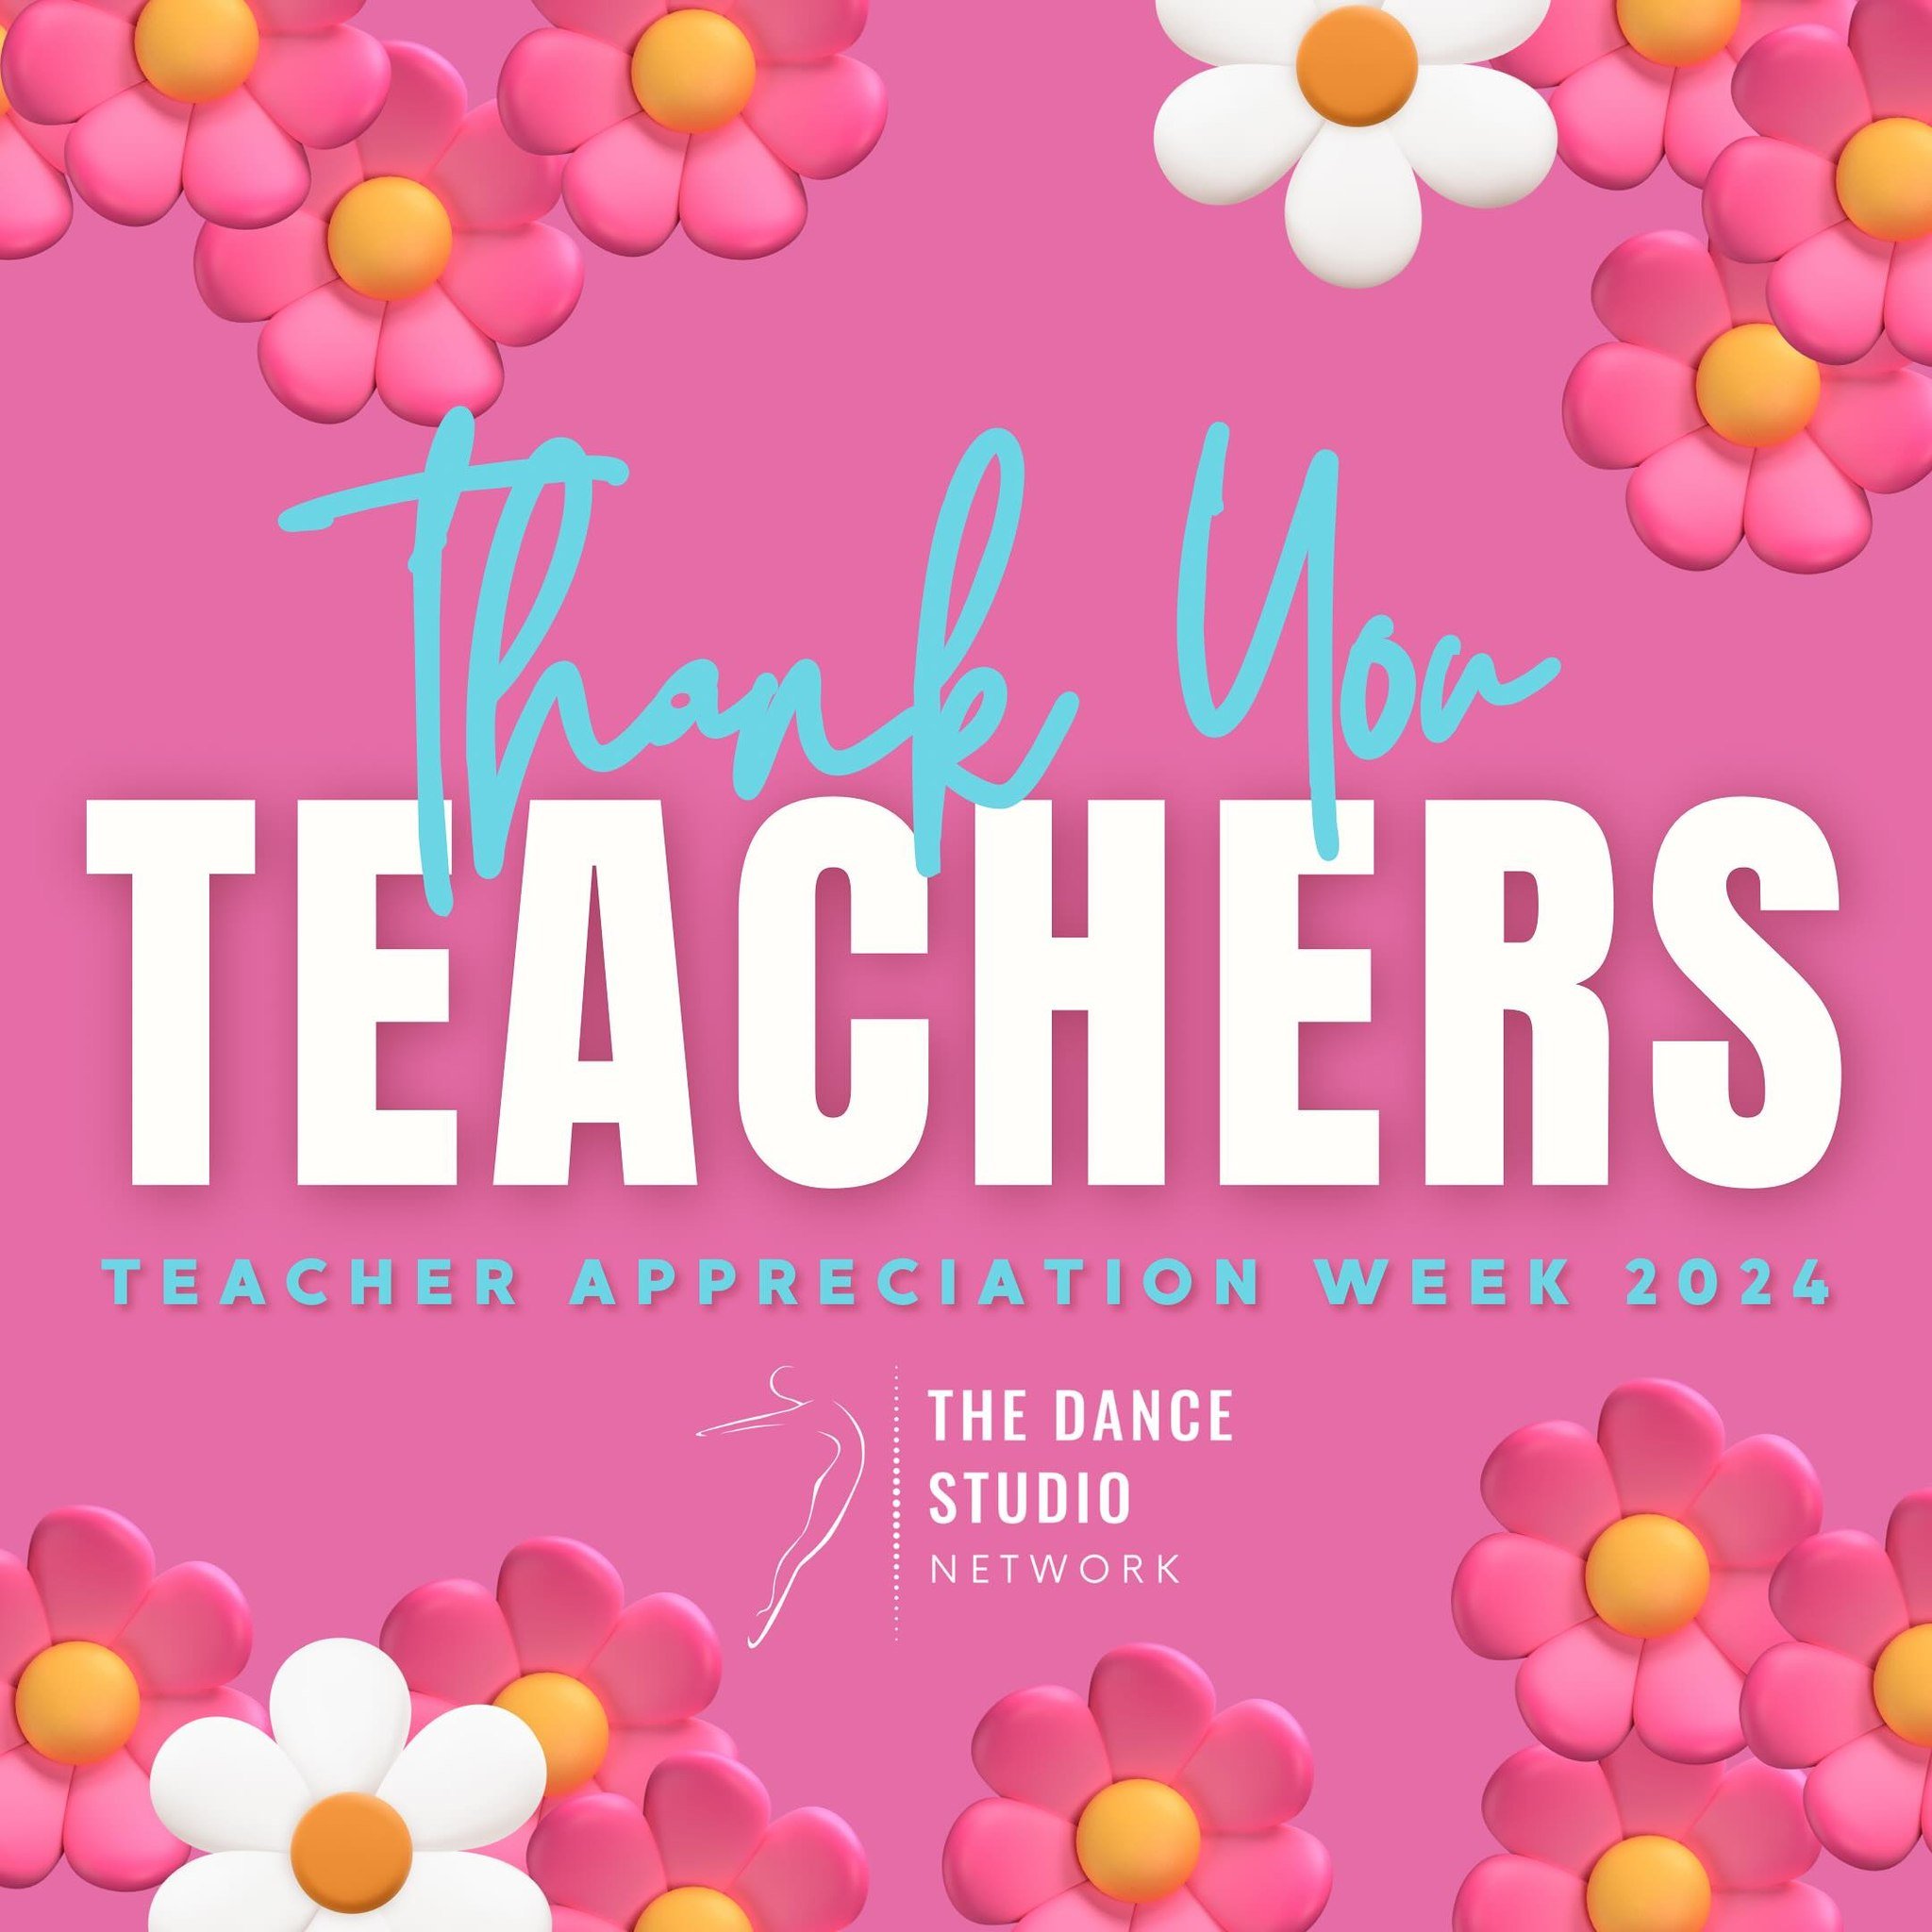 HAPPY TEACHER APPRECIATION WEEK! We love our instructors and are so thankful for the way they pour their hearts into our students. Make sure to show your teachers some extra love this week! 🩷🌸🩵
 
#passionartistrydance #discovertheartistwithin #all